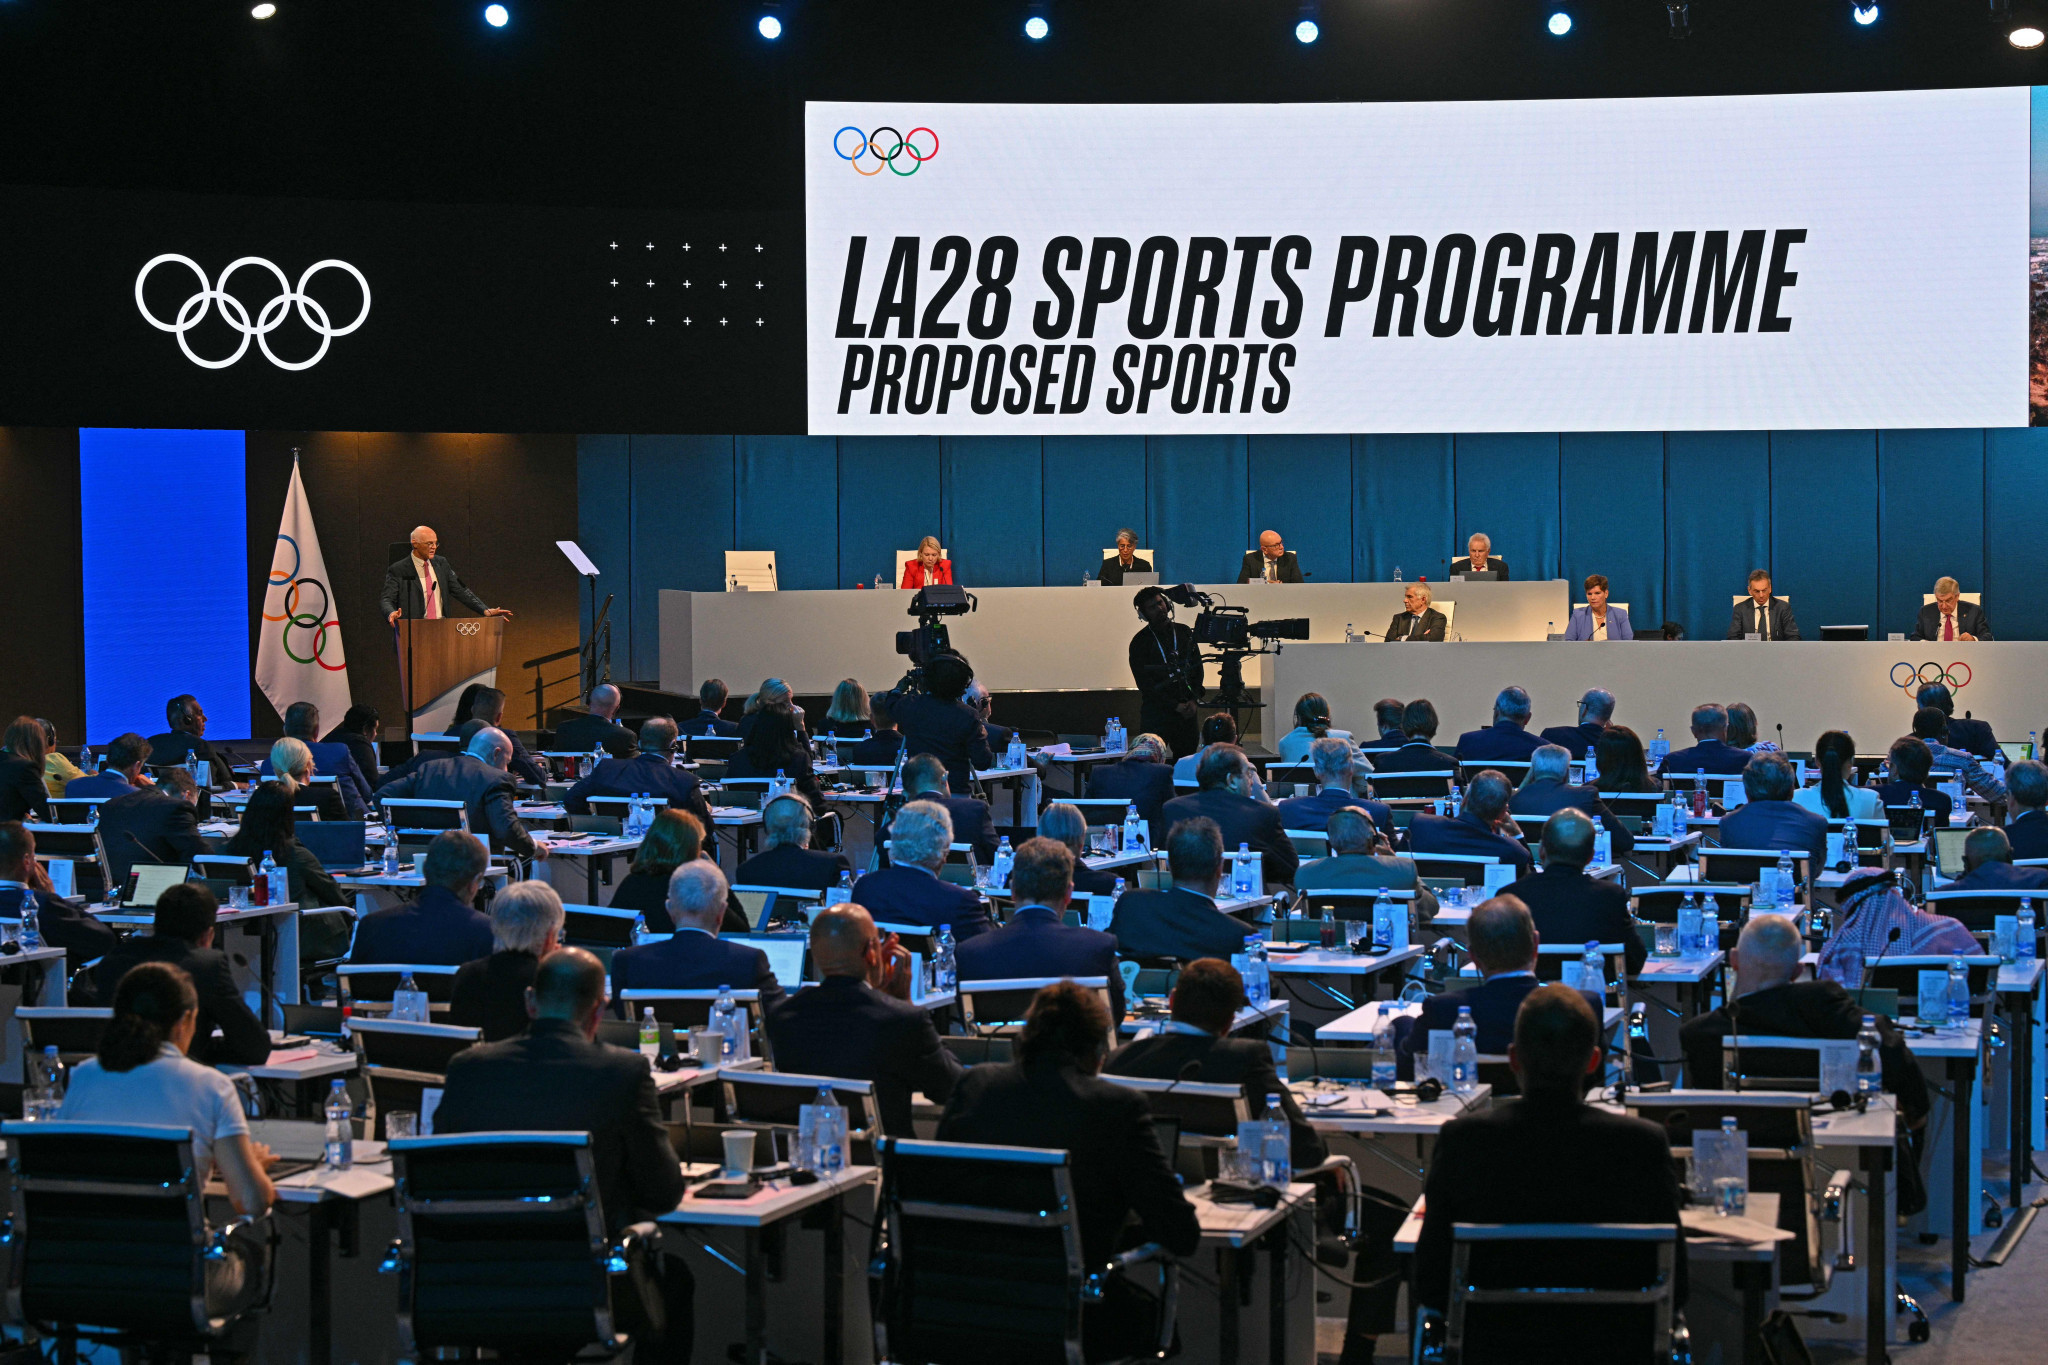 Casey Wasserman's speech about Ukraine and Israel was criticised by Pakistan's IOC member Syed Shahid Ali, who claimed it had overshadowed the presentation of the sports programme for Los Angeles 2028 ©IOC